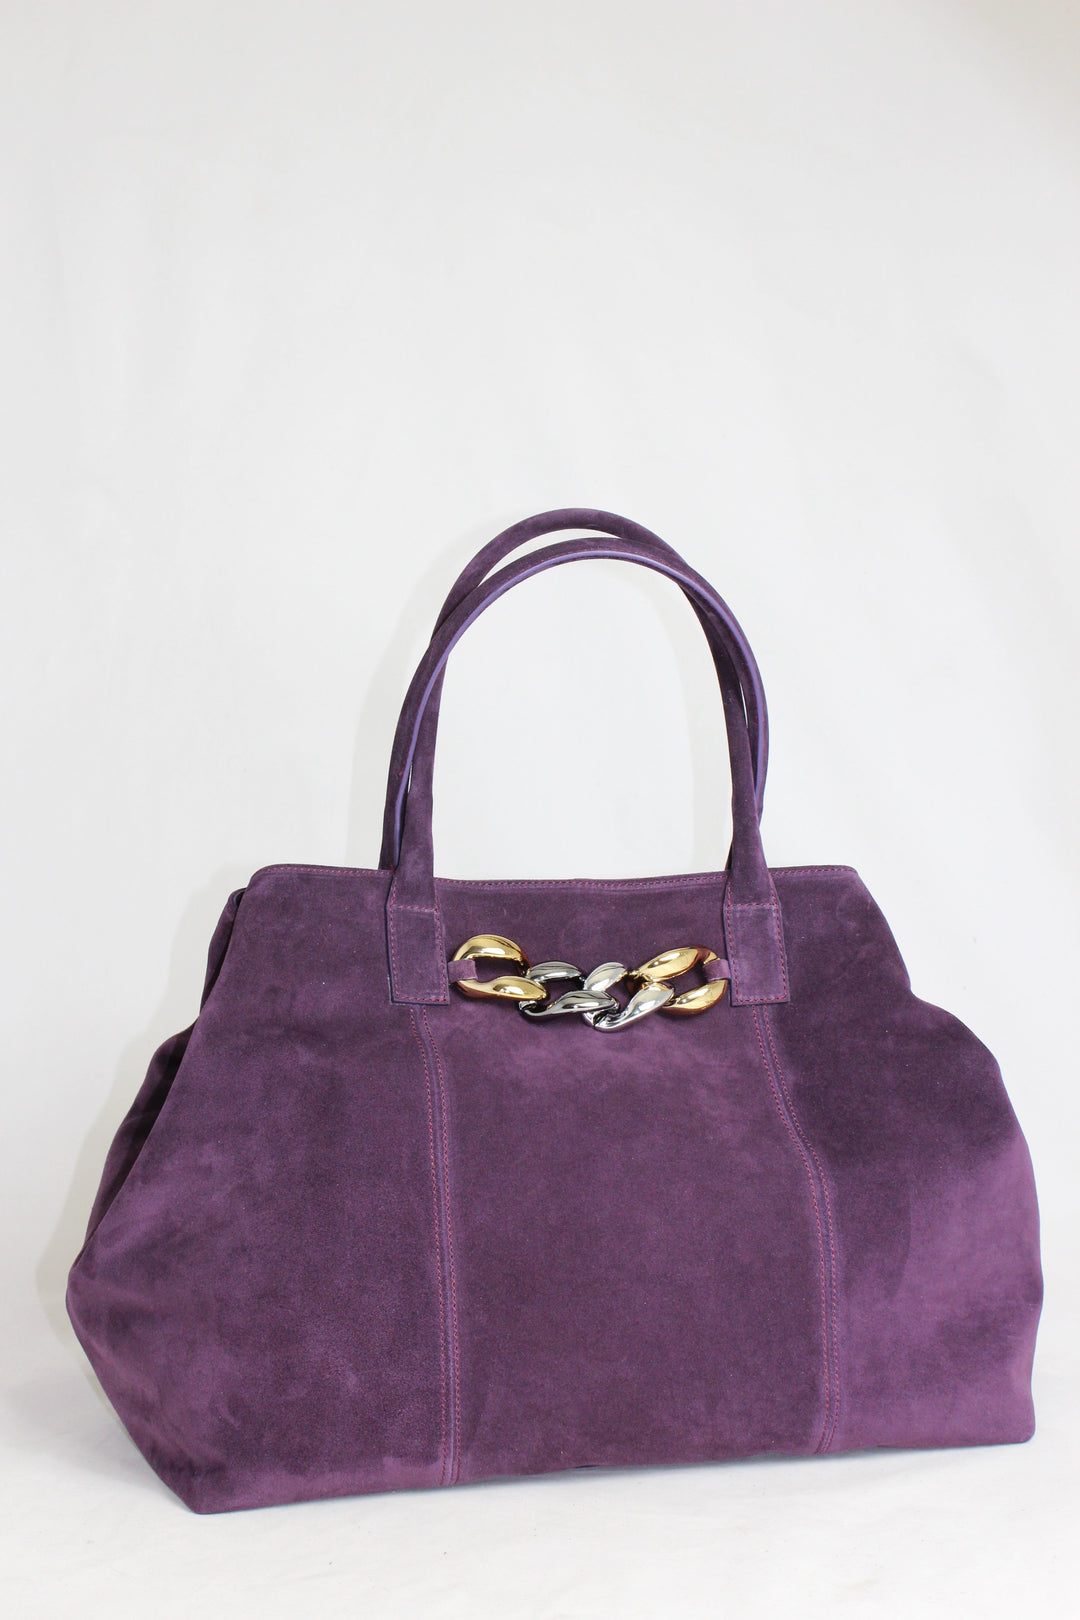 Luxury purple suede handbag with gold and silver chain accents